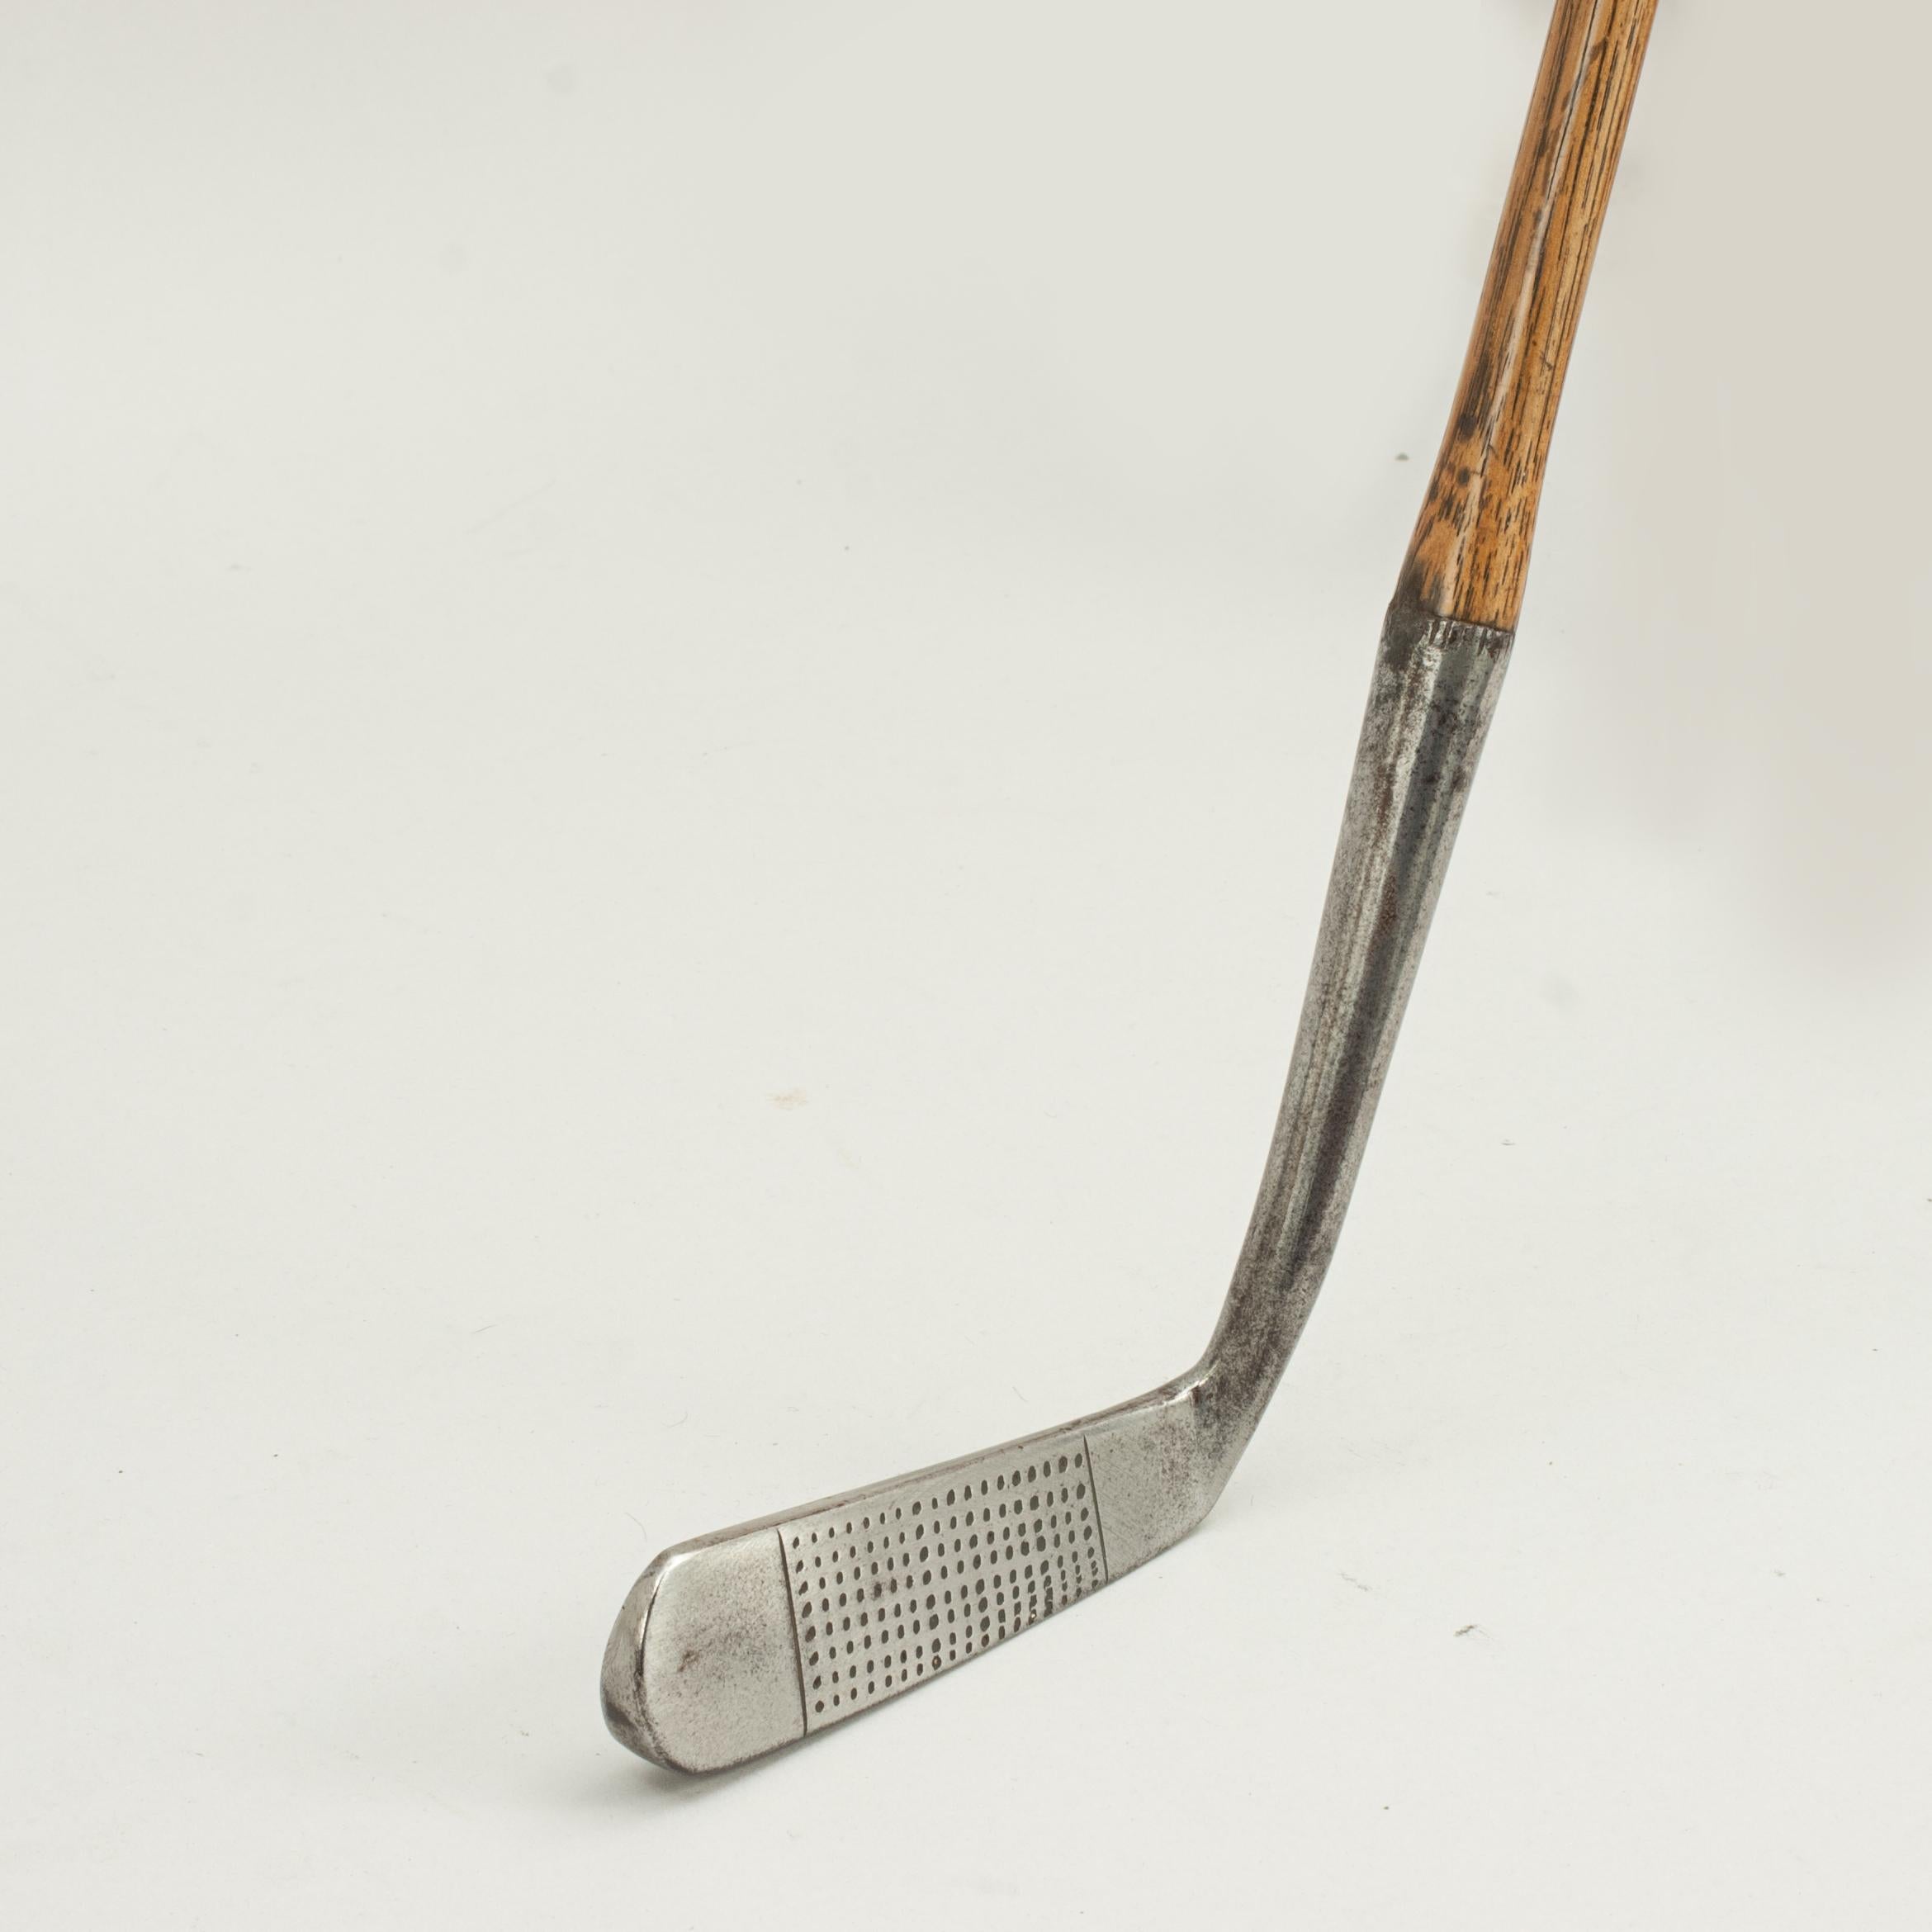 Vintage hickory golf club, putter, Cann & Taylor.
A nice, shallow face blade putter with hand punched dot face markings. The hickory shaft with J. H. Taylor 